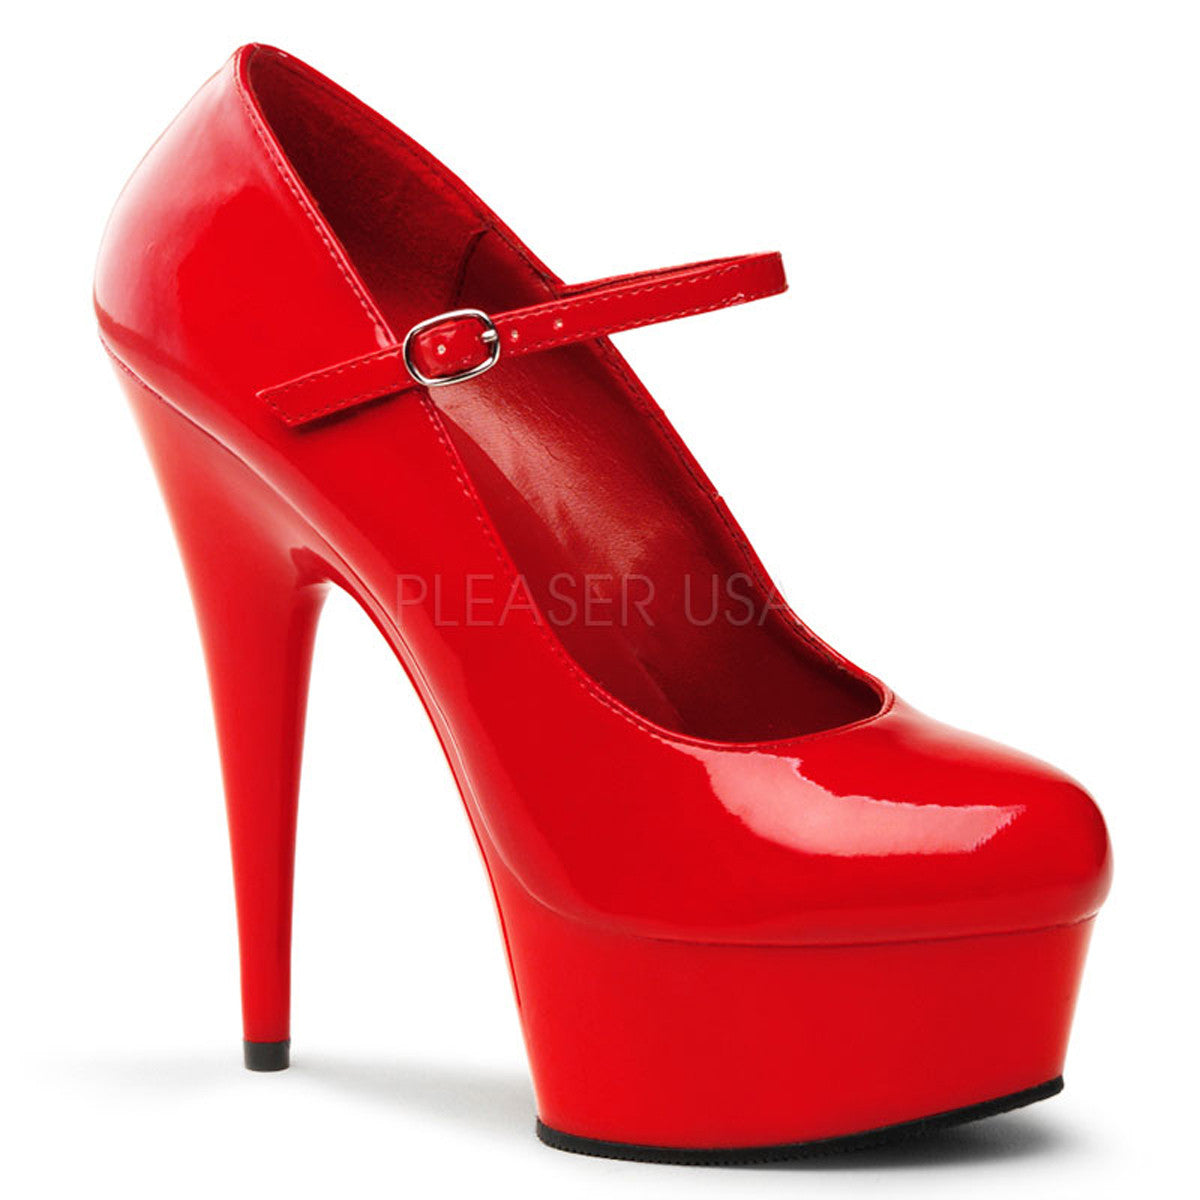 PLEASER DELIGHT-687 Red-Red Mary Jane Pumps - Shoecup.com